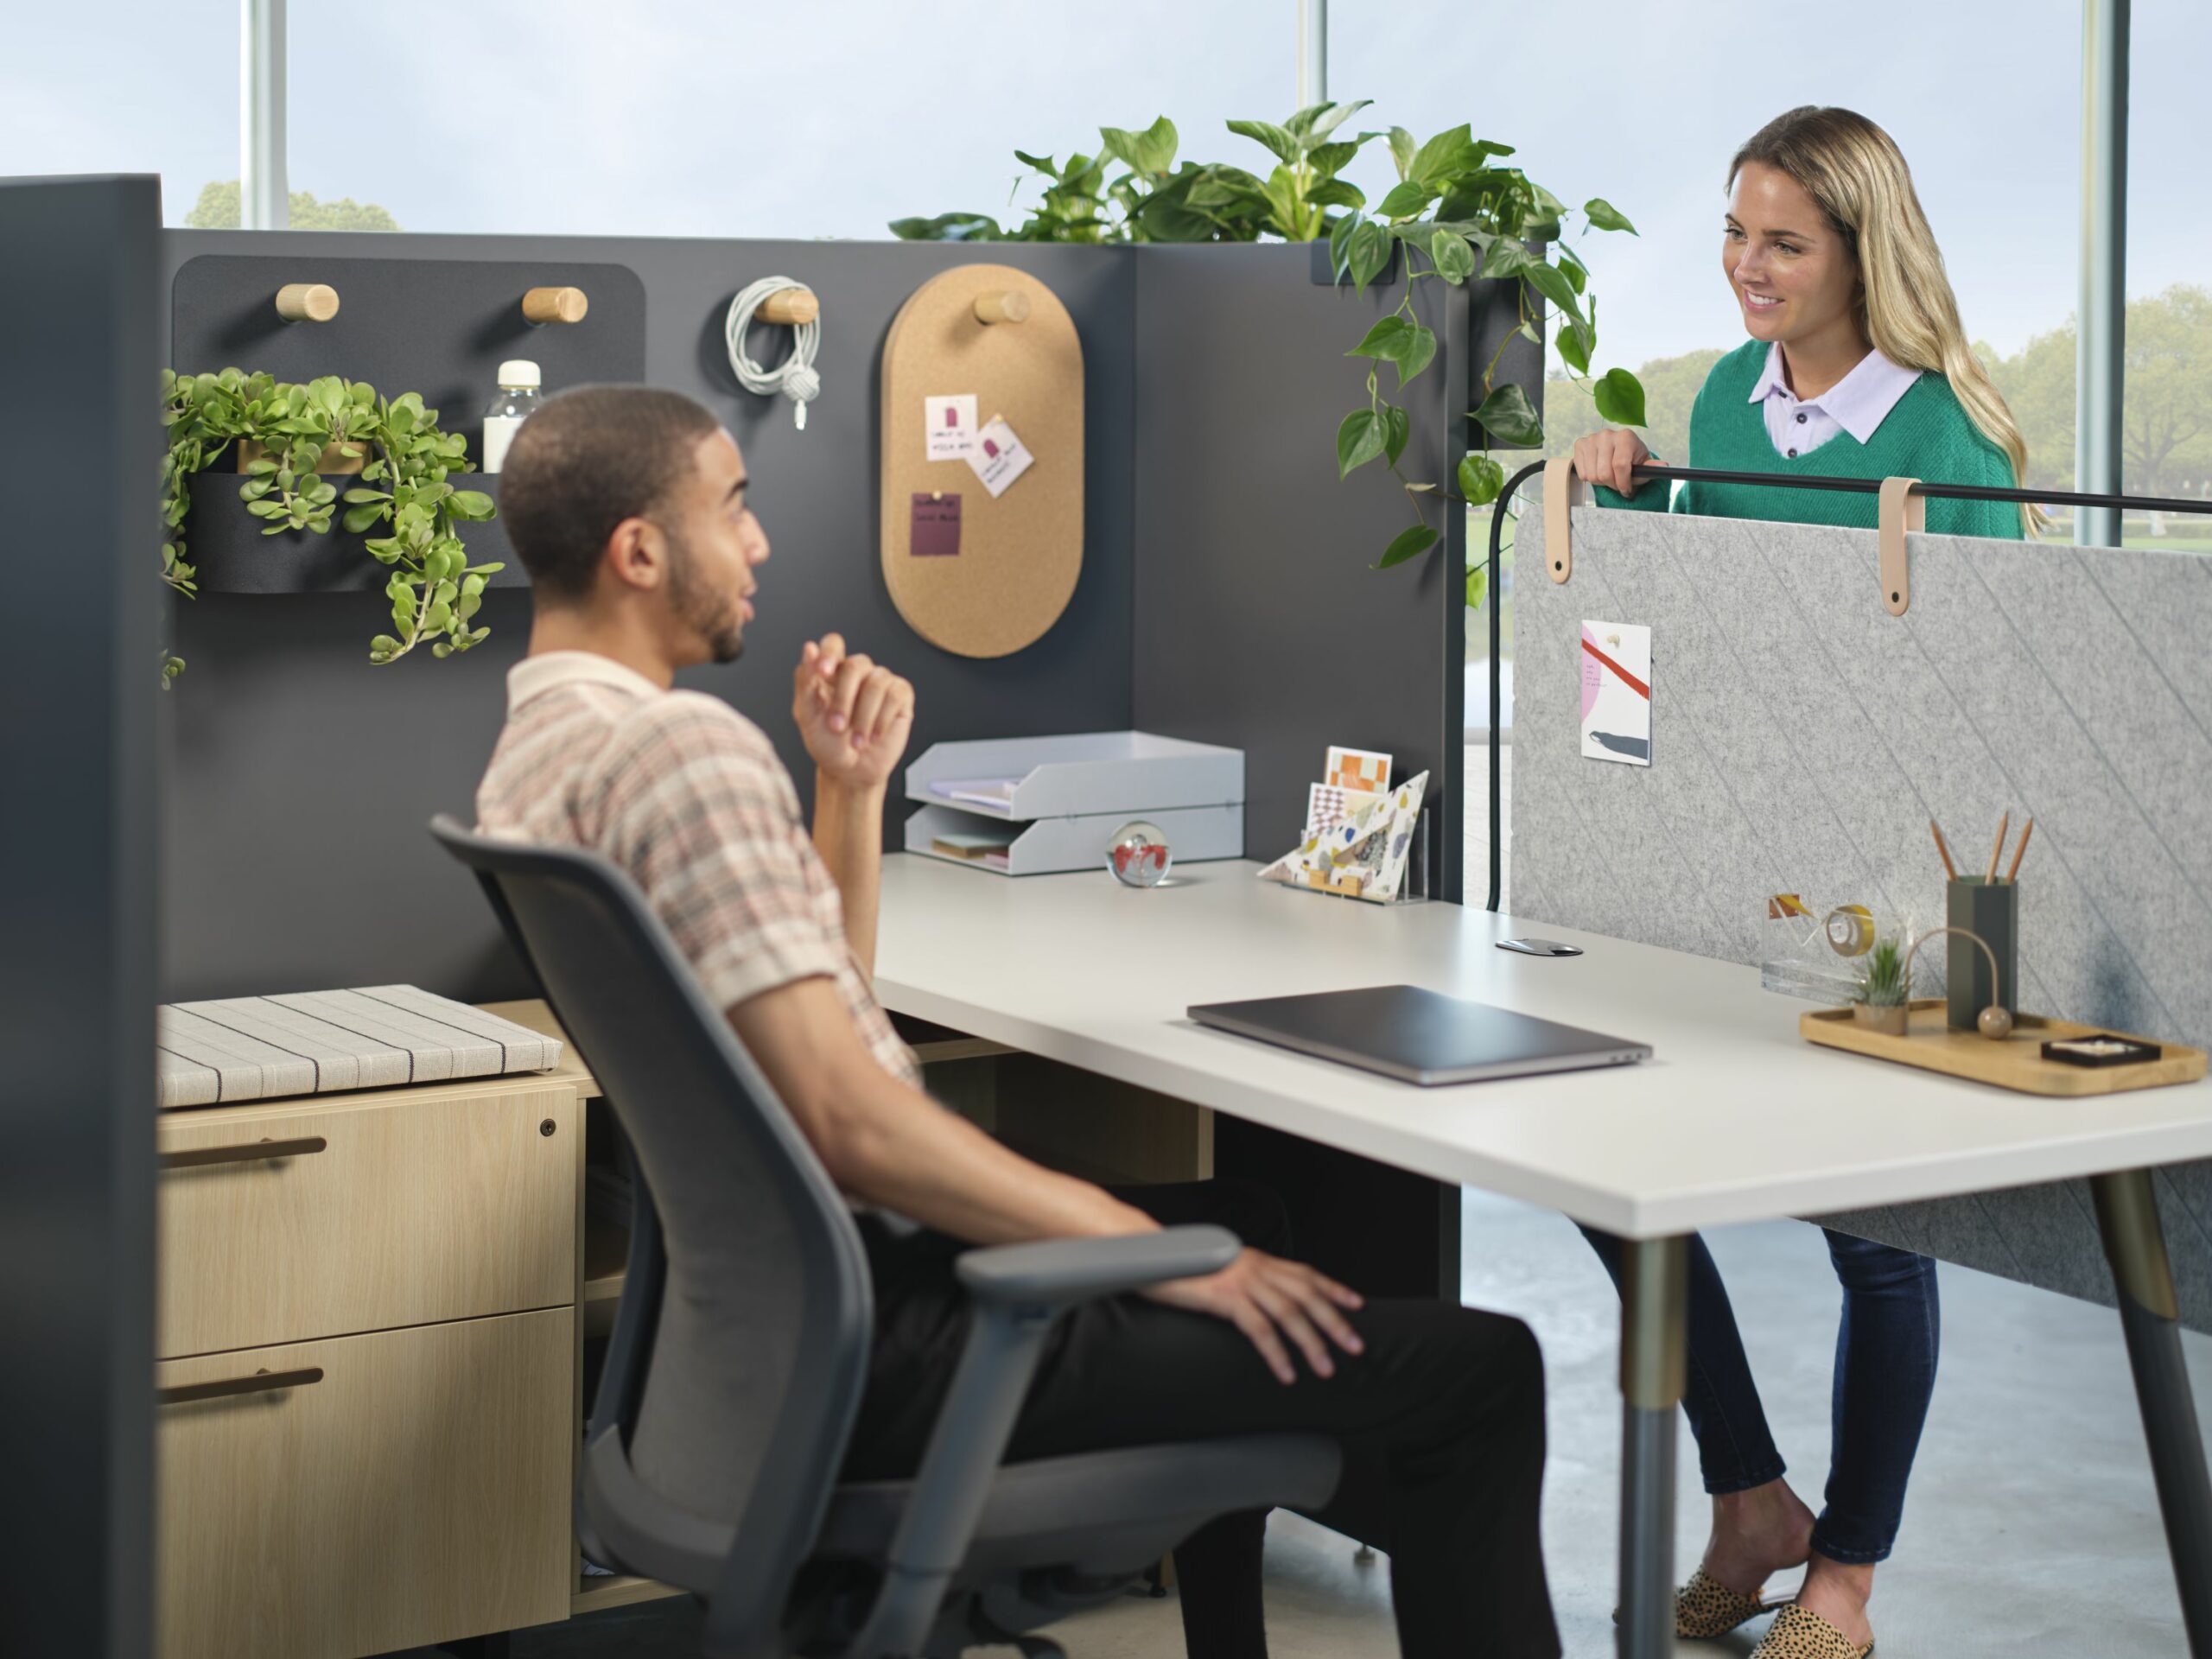 man working at a desk talks to woman standing behind screen there are planters in the workstation